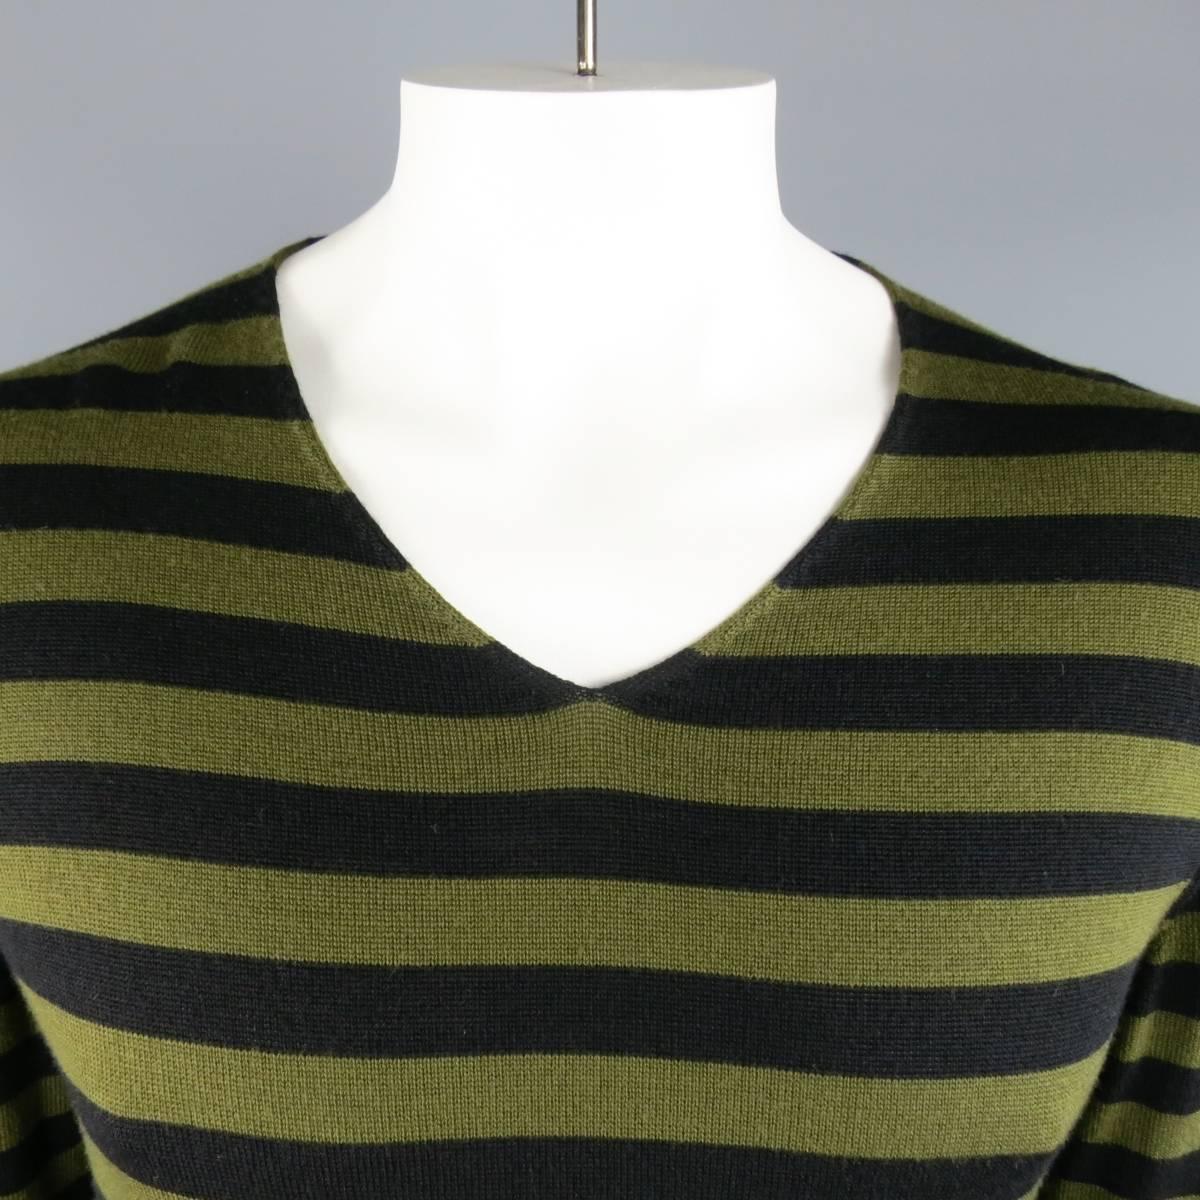 BLACK by COMME DES GARCONS pullover comes in an olive and black thick striped wool material and a V neck. Made in Japan.
 
Excellent Pre-Owned Condition
Marked Size: XL AD2014
 
Measurements
 
Shoulders: 18 in.
Sleeve: 26 in.
Chest: 40 in.
Length: